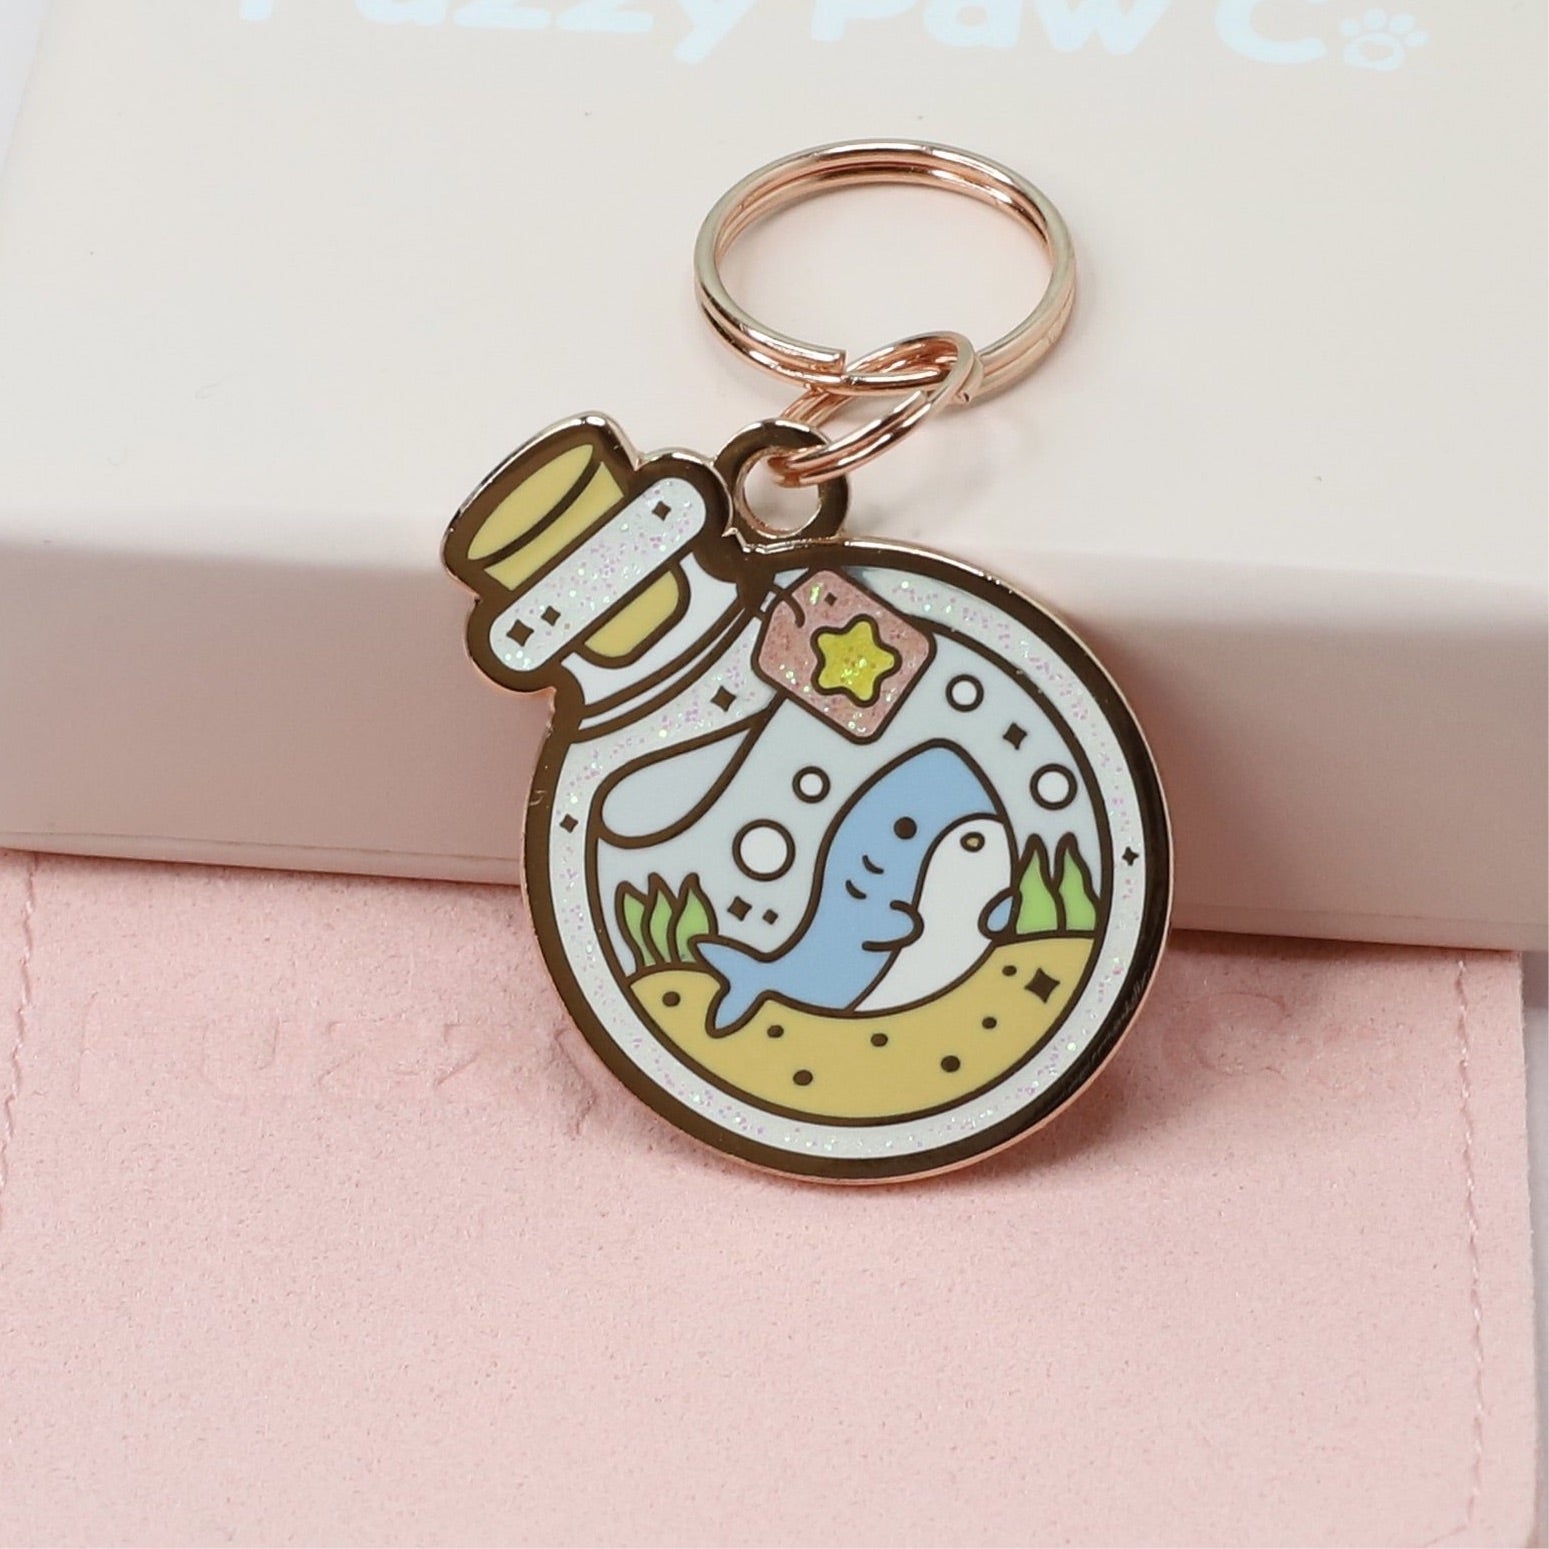 Pet ID Tag - Shark in a Bottle